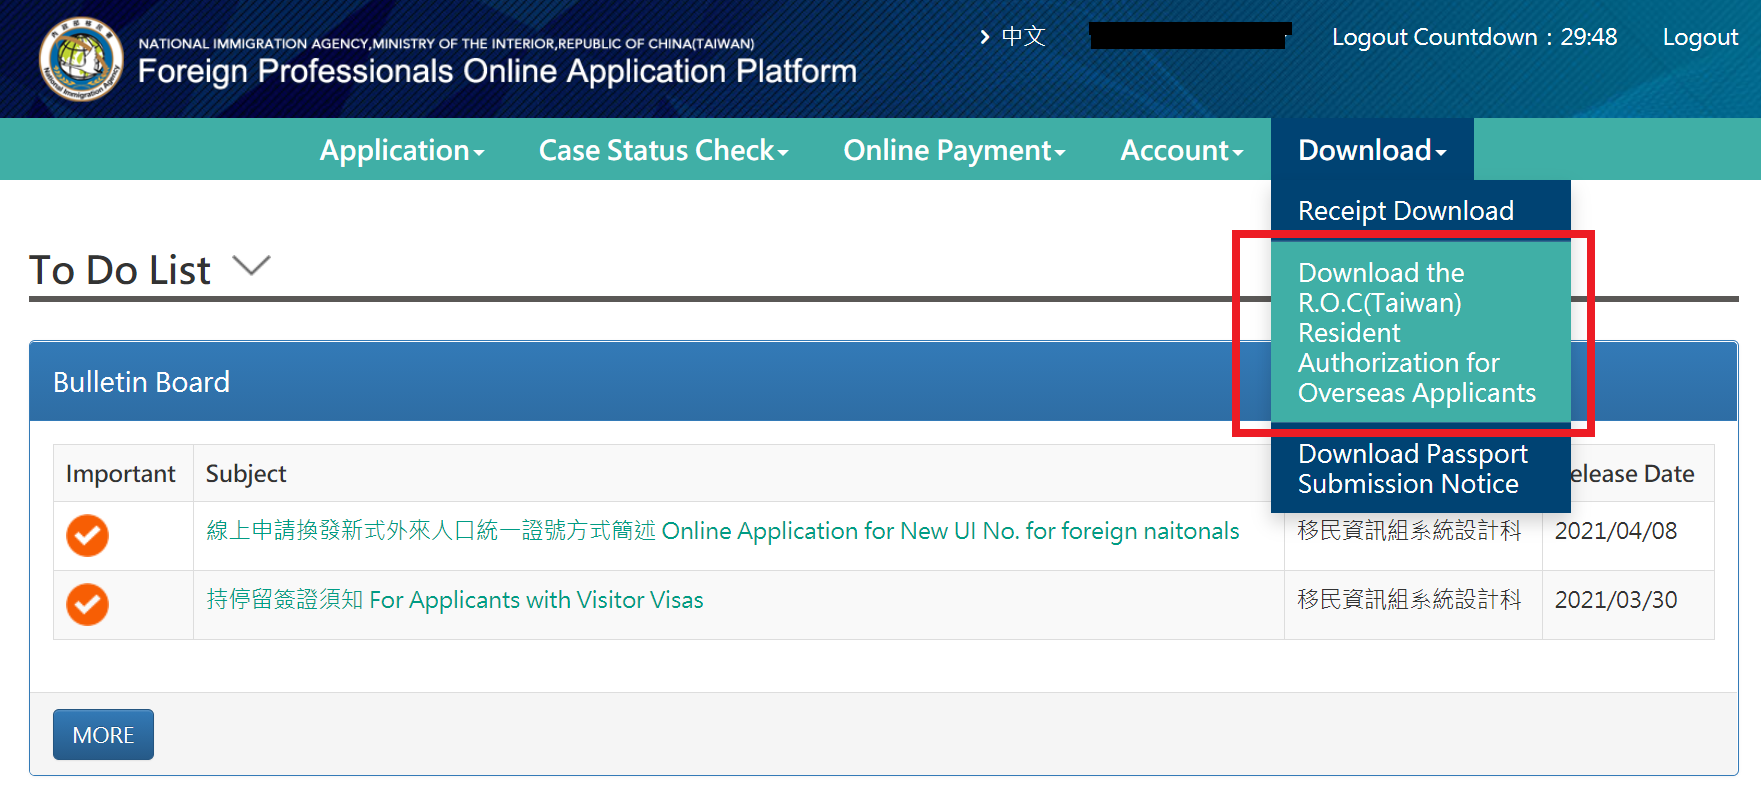 Download resident authorization for overseas applicants